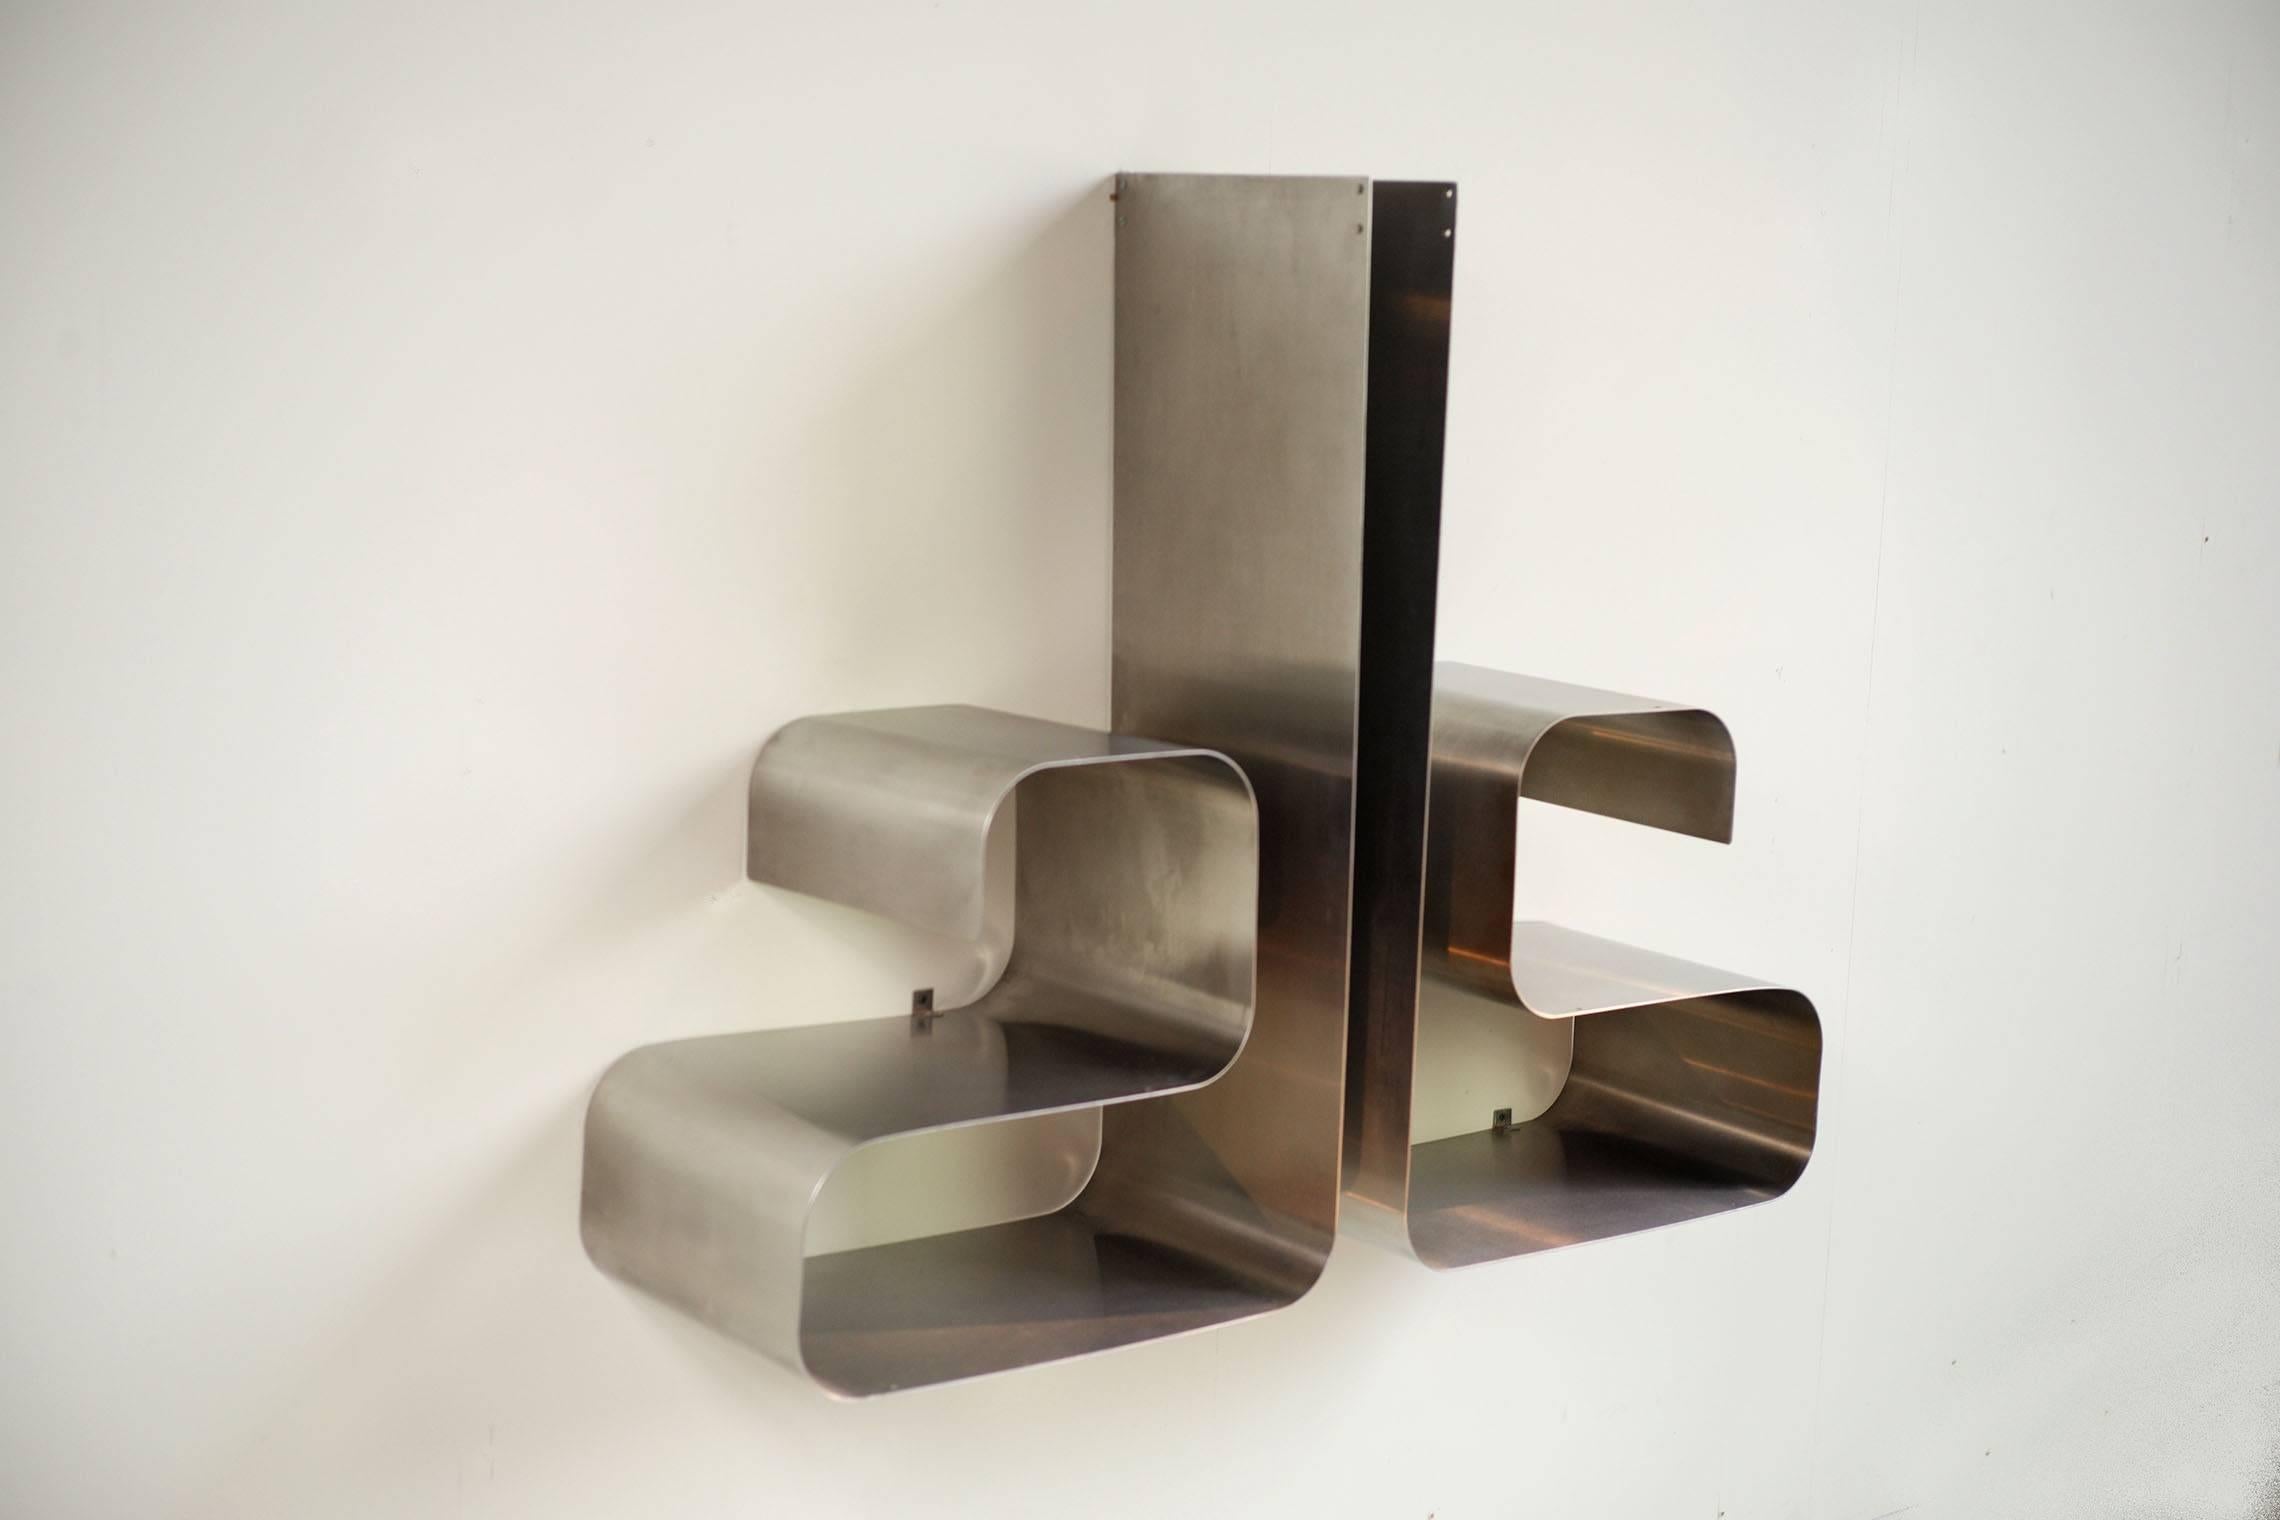 This pair of Zig-Zag shelves was designed by Joelle Ferlande & François Monnet for Kappa in France, circa 1970. They are made from smooth stainless steel frames and can be stood portrait or horizontal.


Bibliography: 